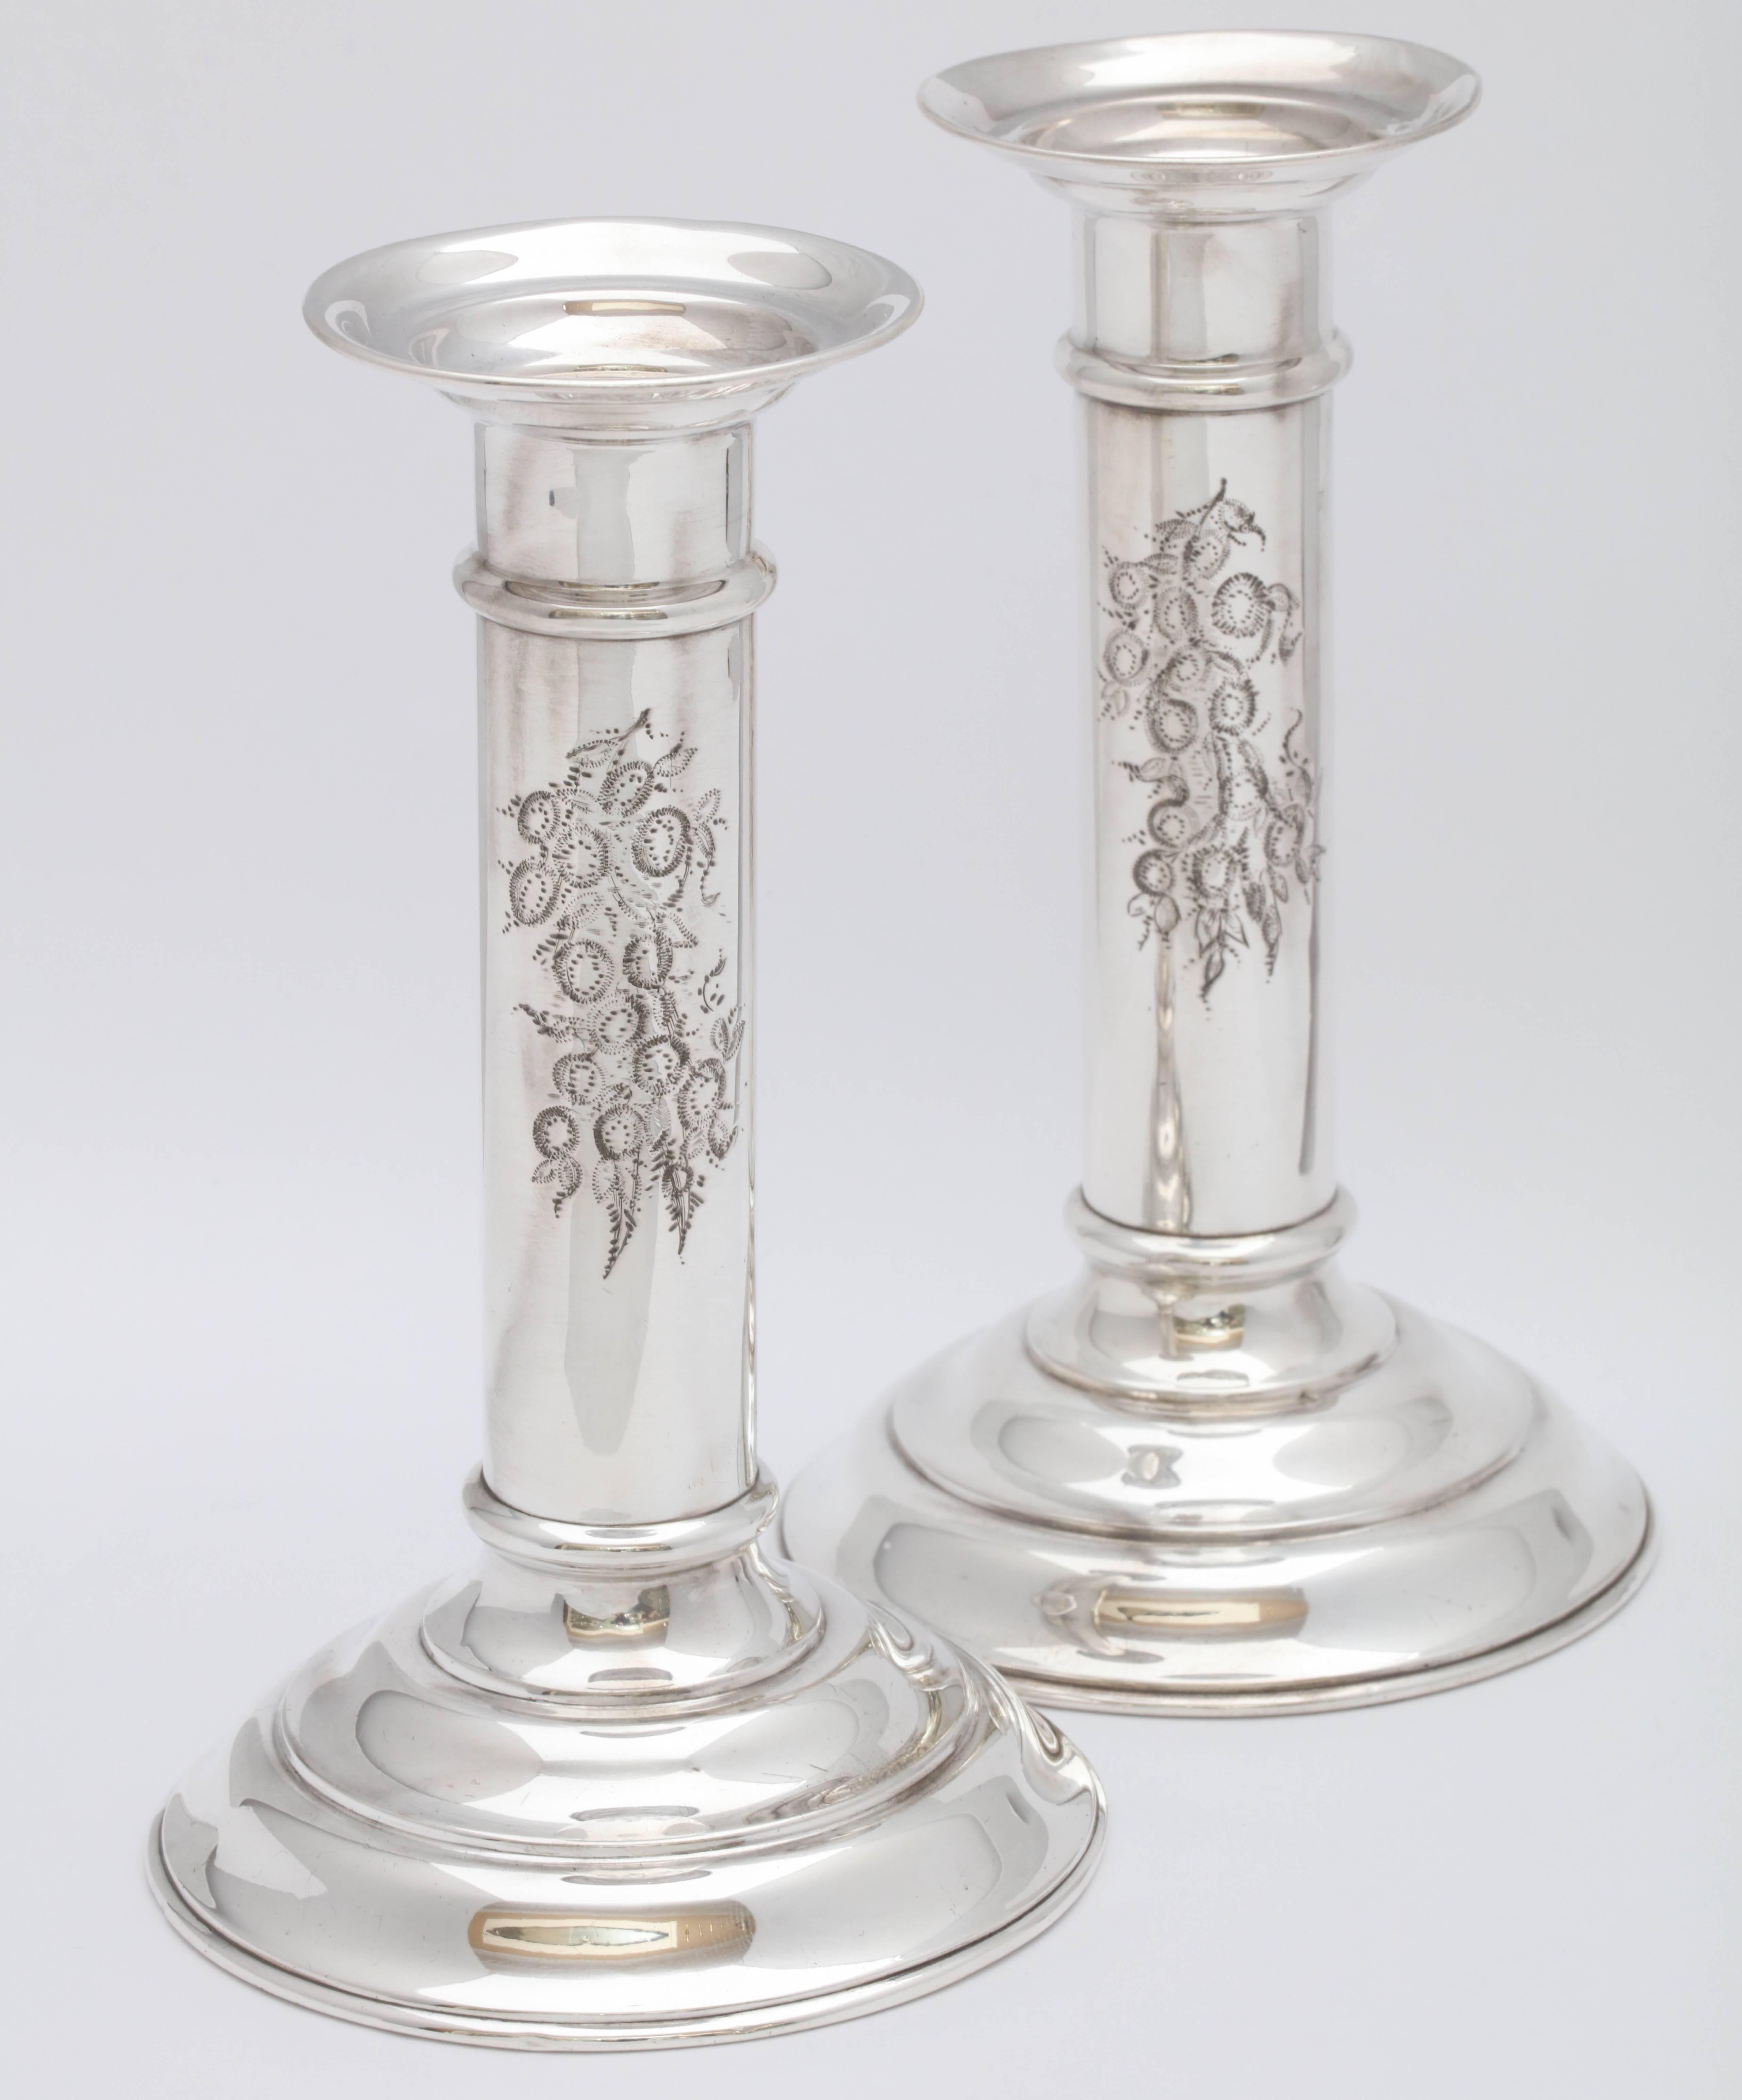 Pair of Edwardian, sterling silver, column-form candlesticks, R. Wallace and Sons Mfg. Co., Wallingford, Ct., circa 1910. Small, lovely floral design is etched into one side of each of the columns. Each measures 6 inches high x 3 1/2 inches diameter